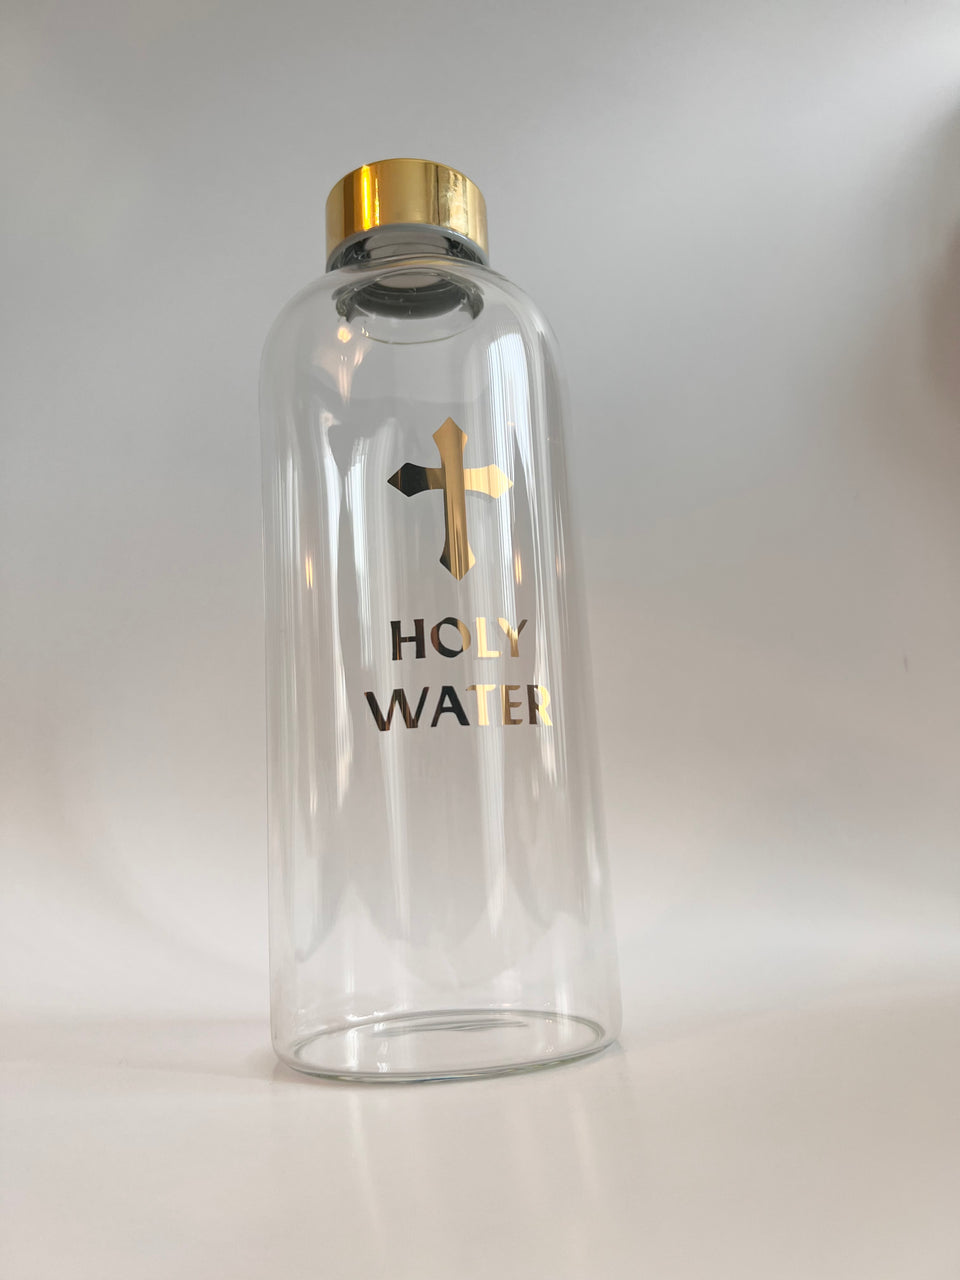 HOLY WATER